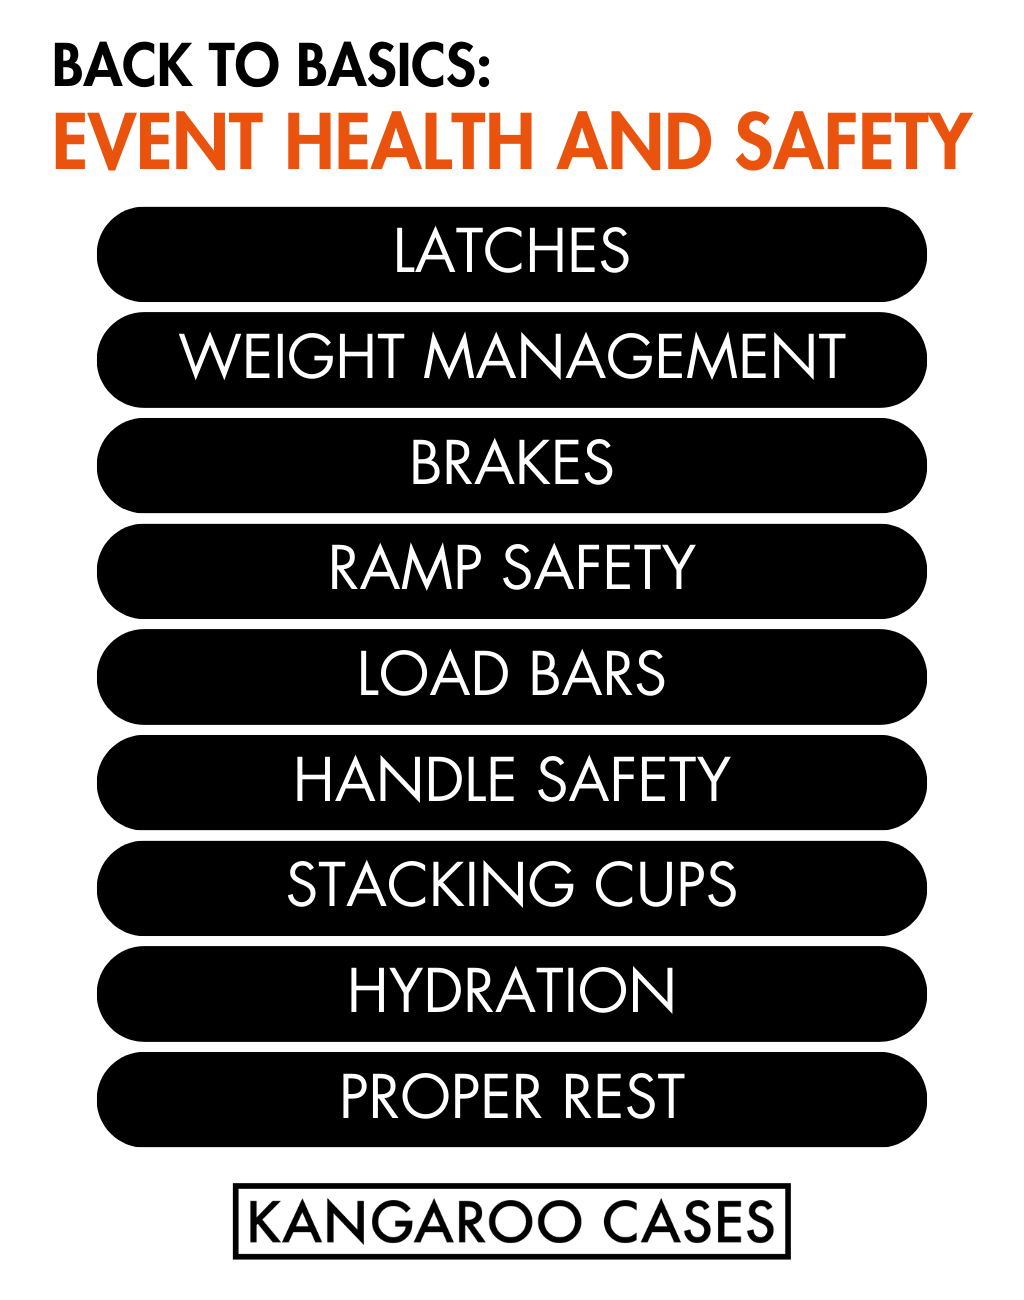 Infographic: 9 Event Health and Safety Tips for Crews